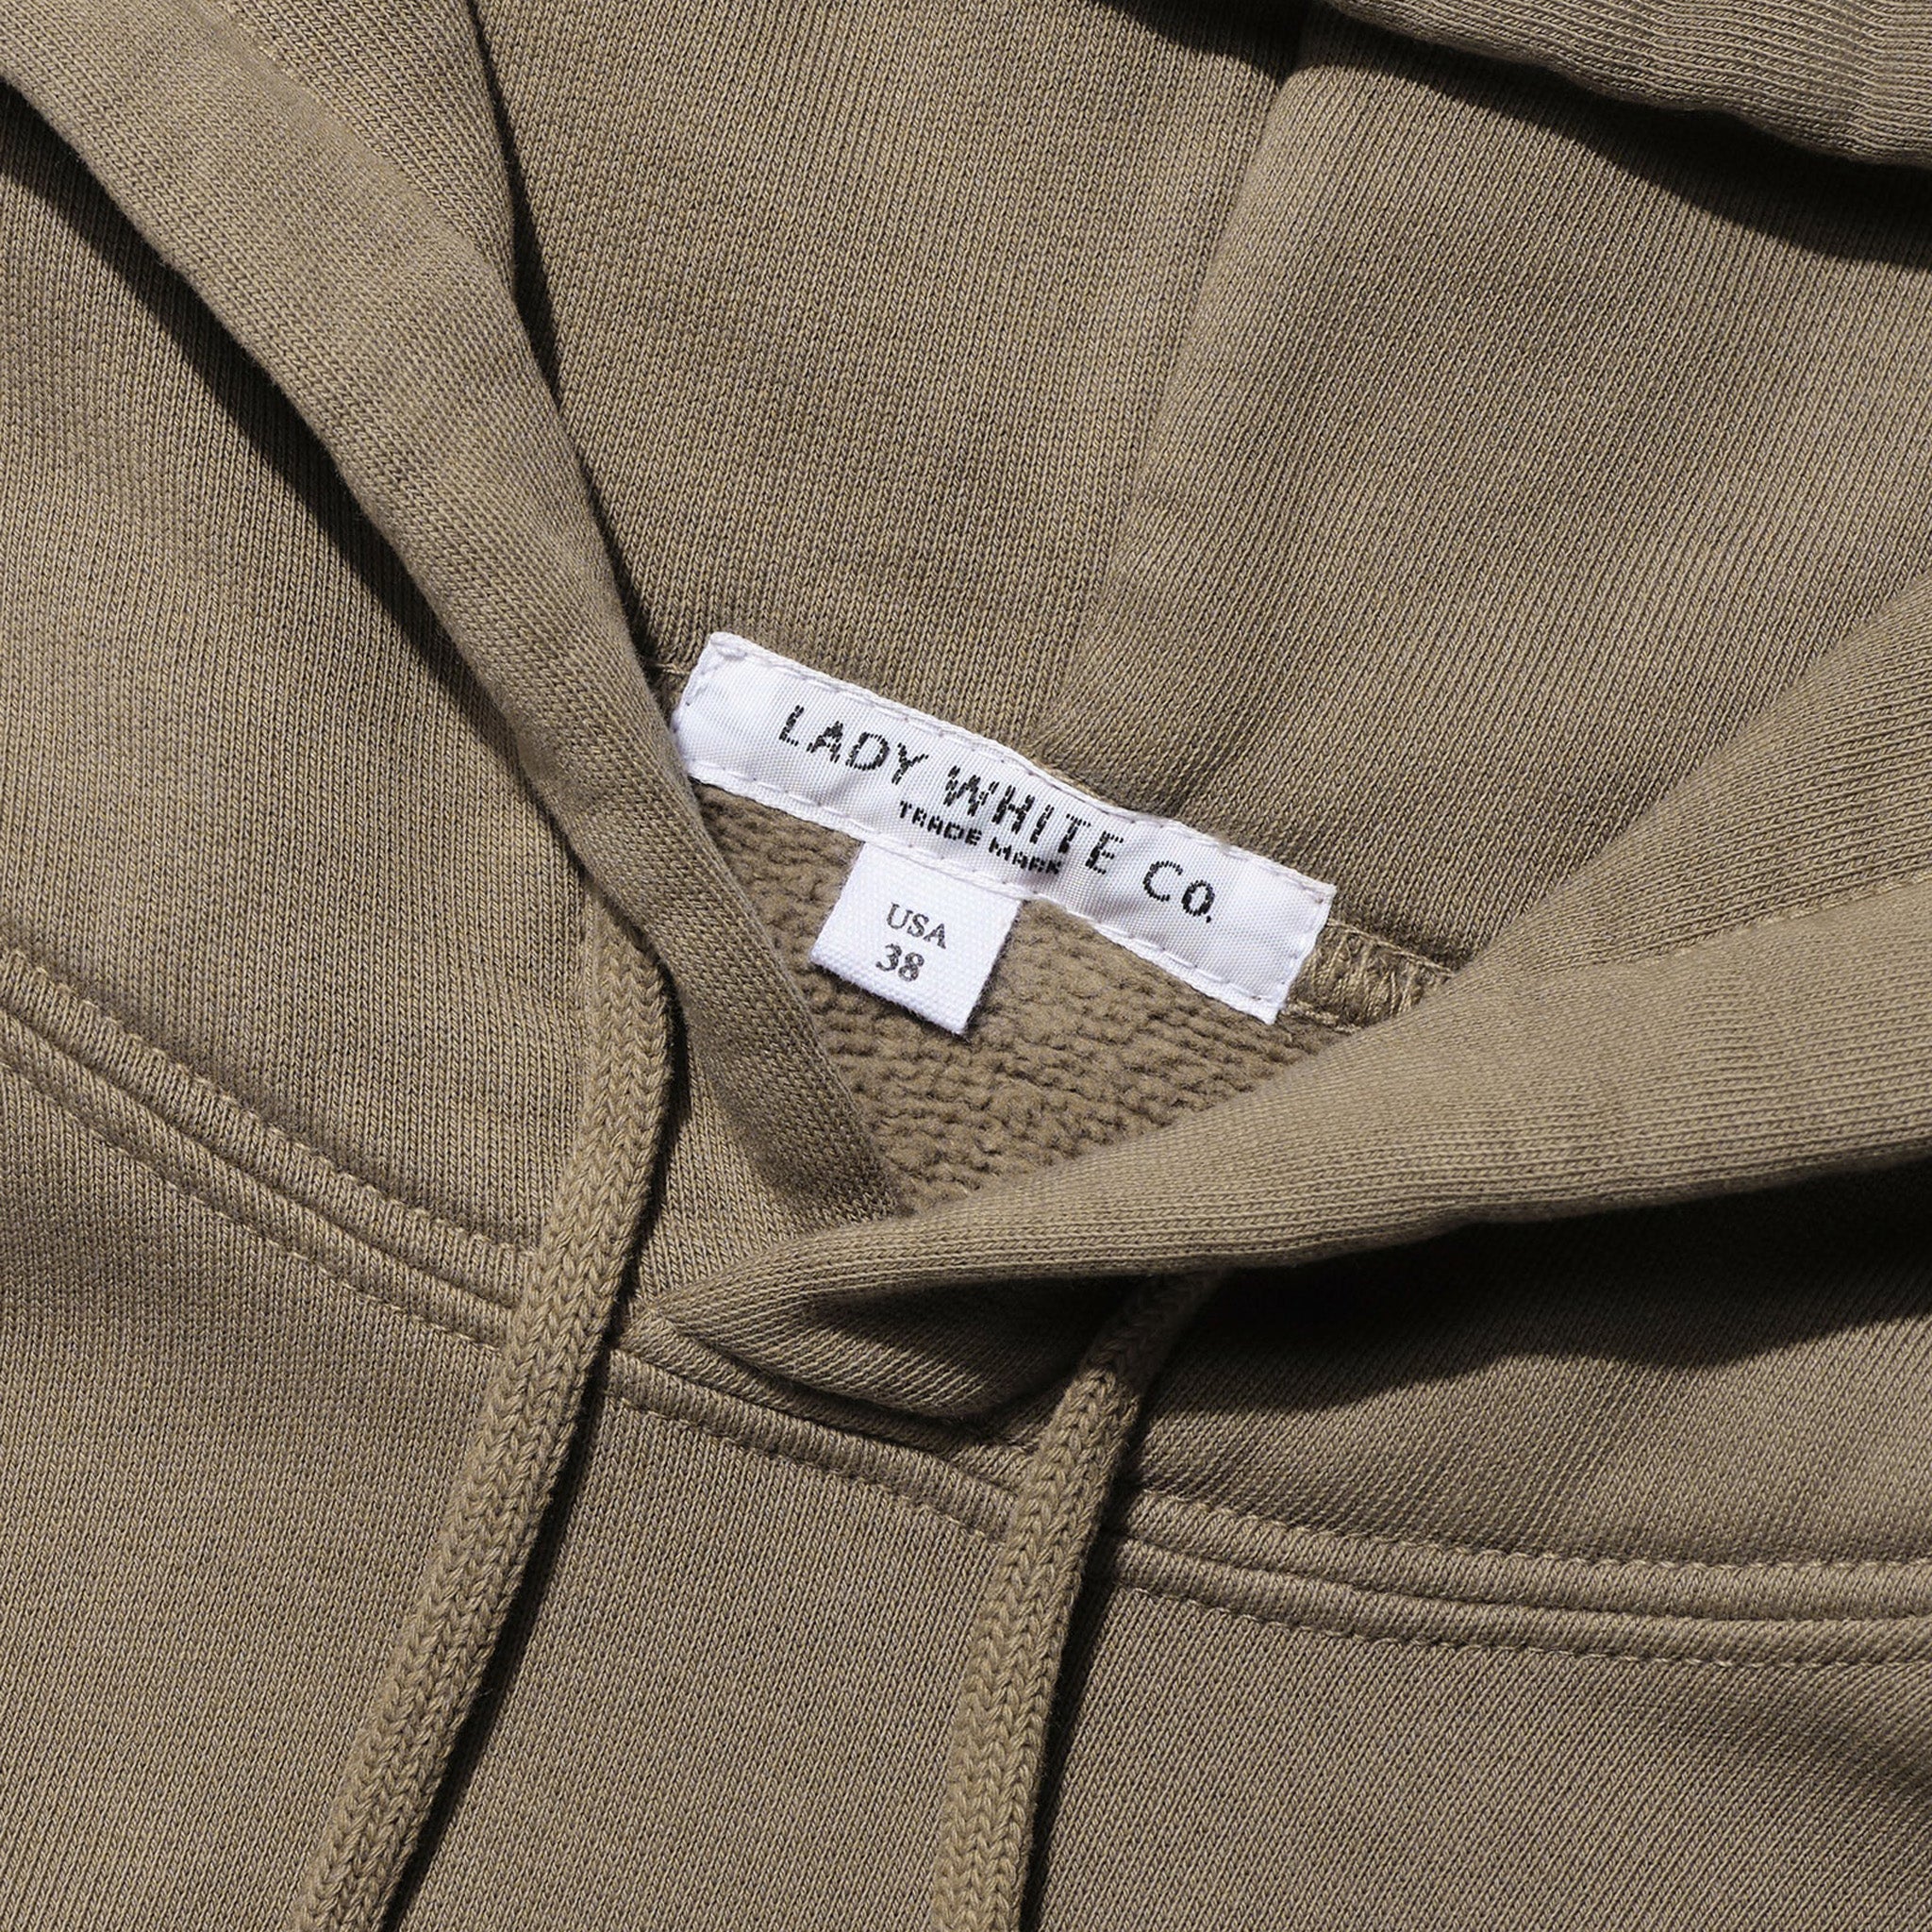 Lady White Co. LWC Hoodie (Taupe) - August Shop